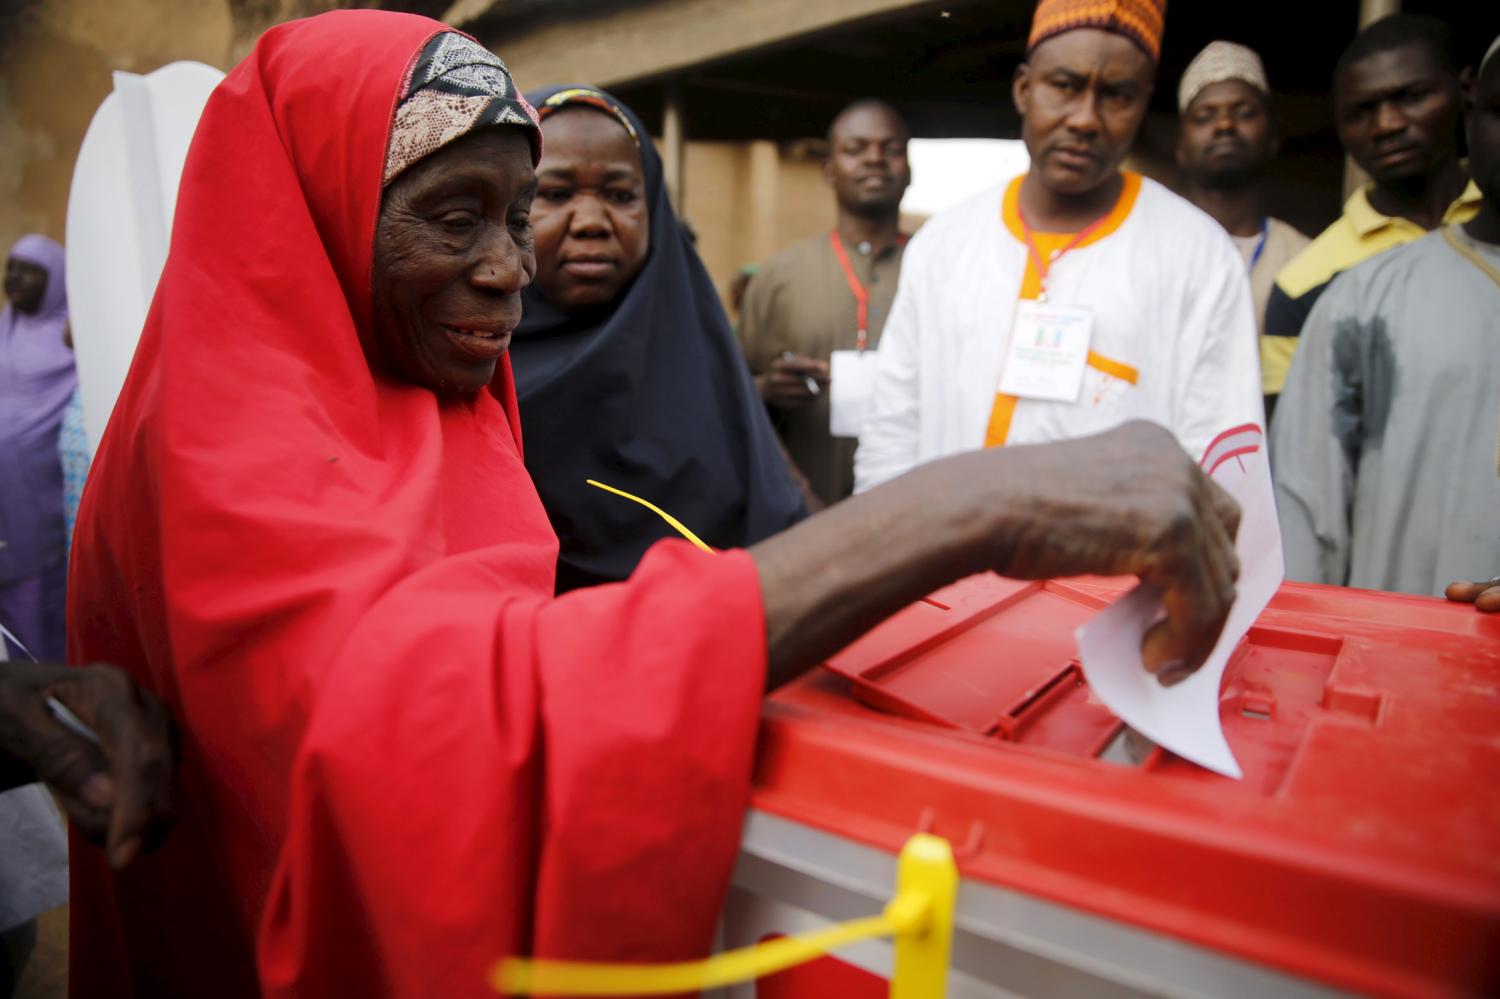 A woman casts her vote at a polling unit in Daura, northwest Nigeria March 28, 2015. REUTERS/Akintunde Akinleye - GF10000042218